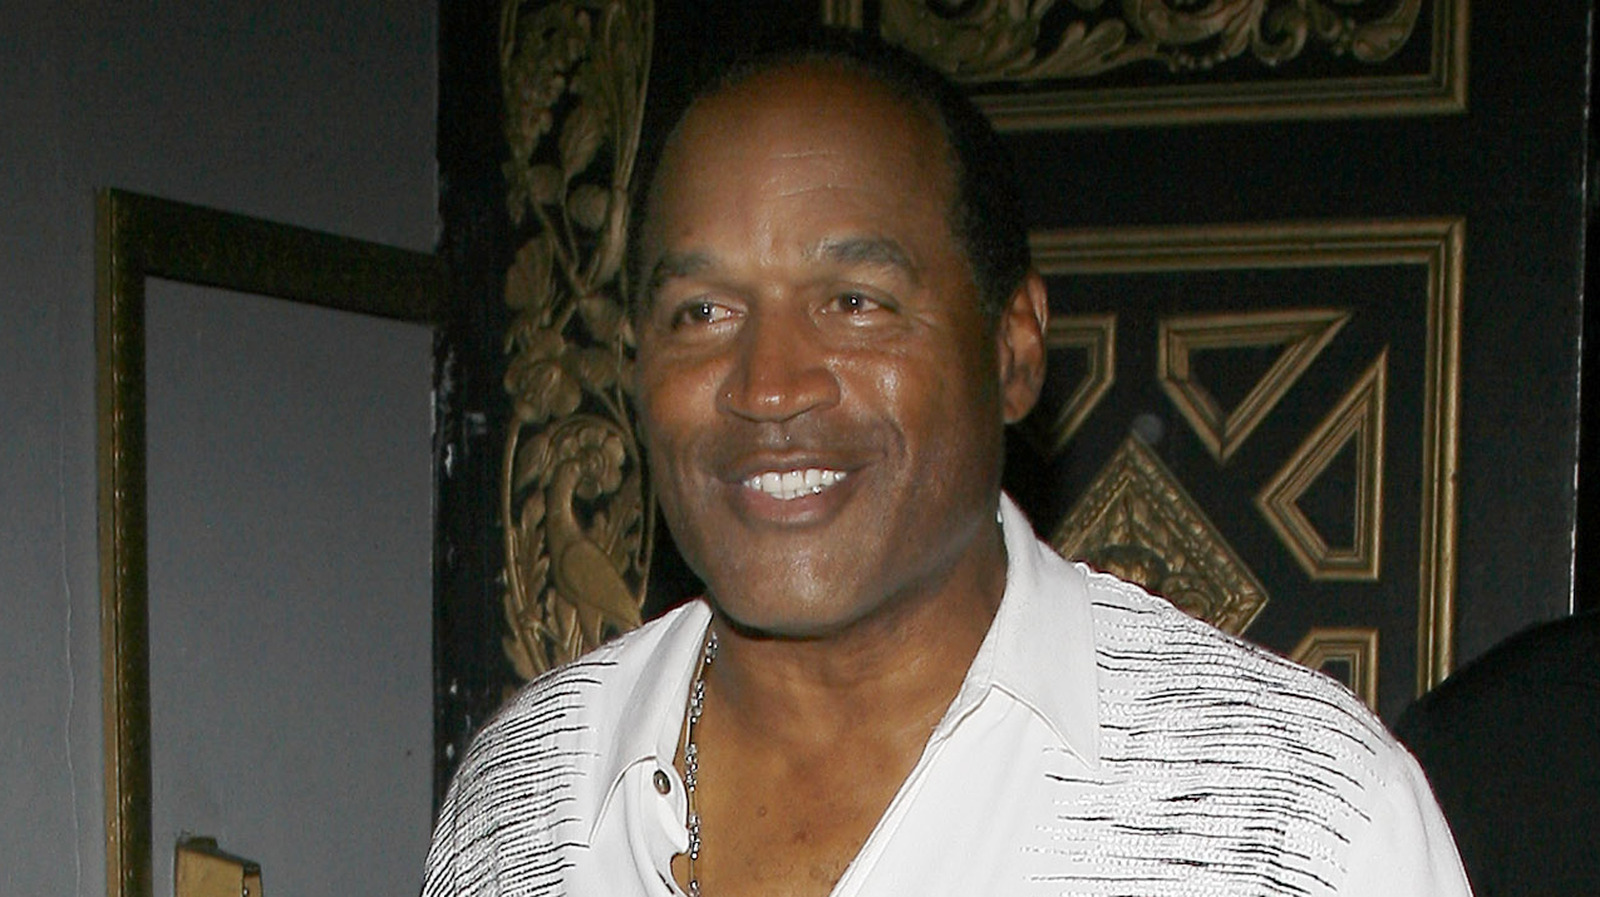 One Of O.J. Simpson's Final Social Media Posts Takes On Eerie New Tone